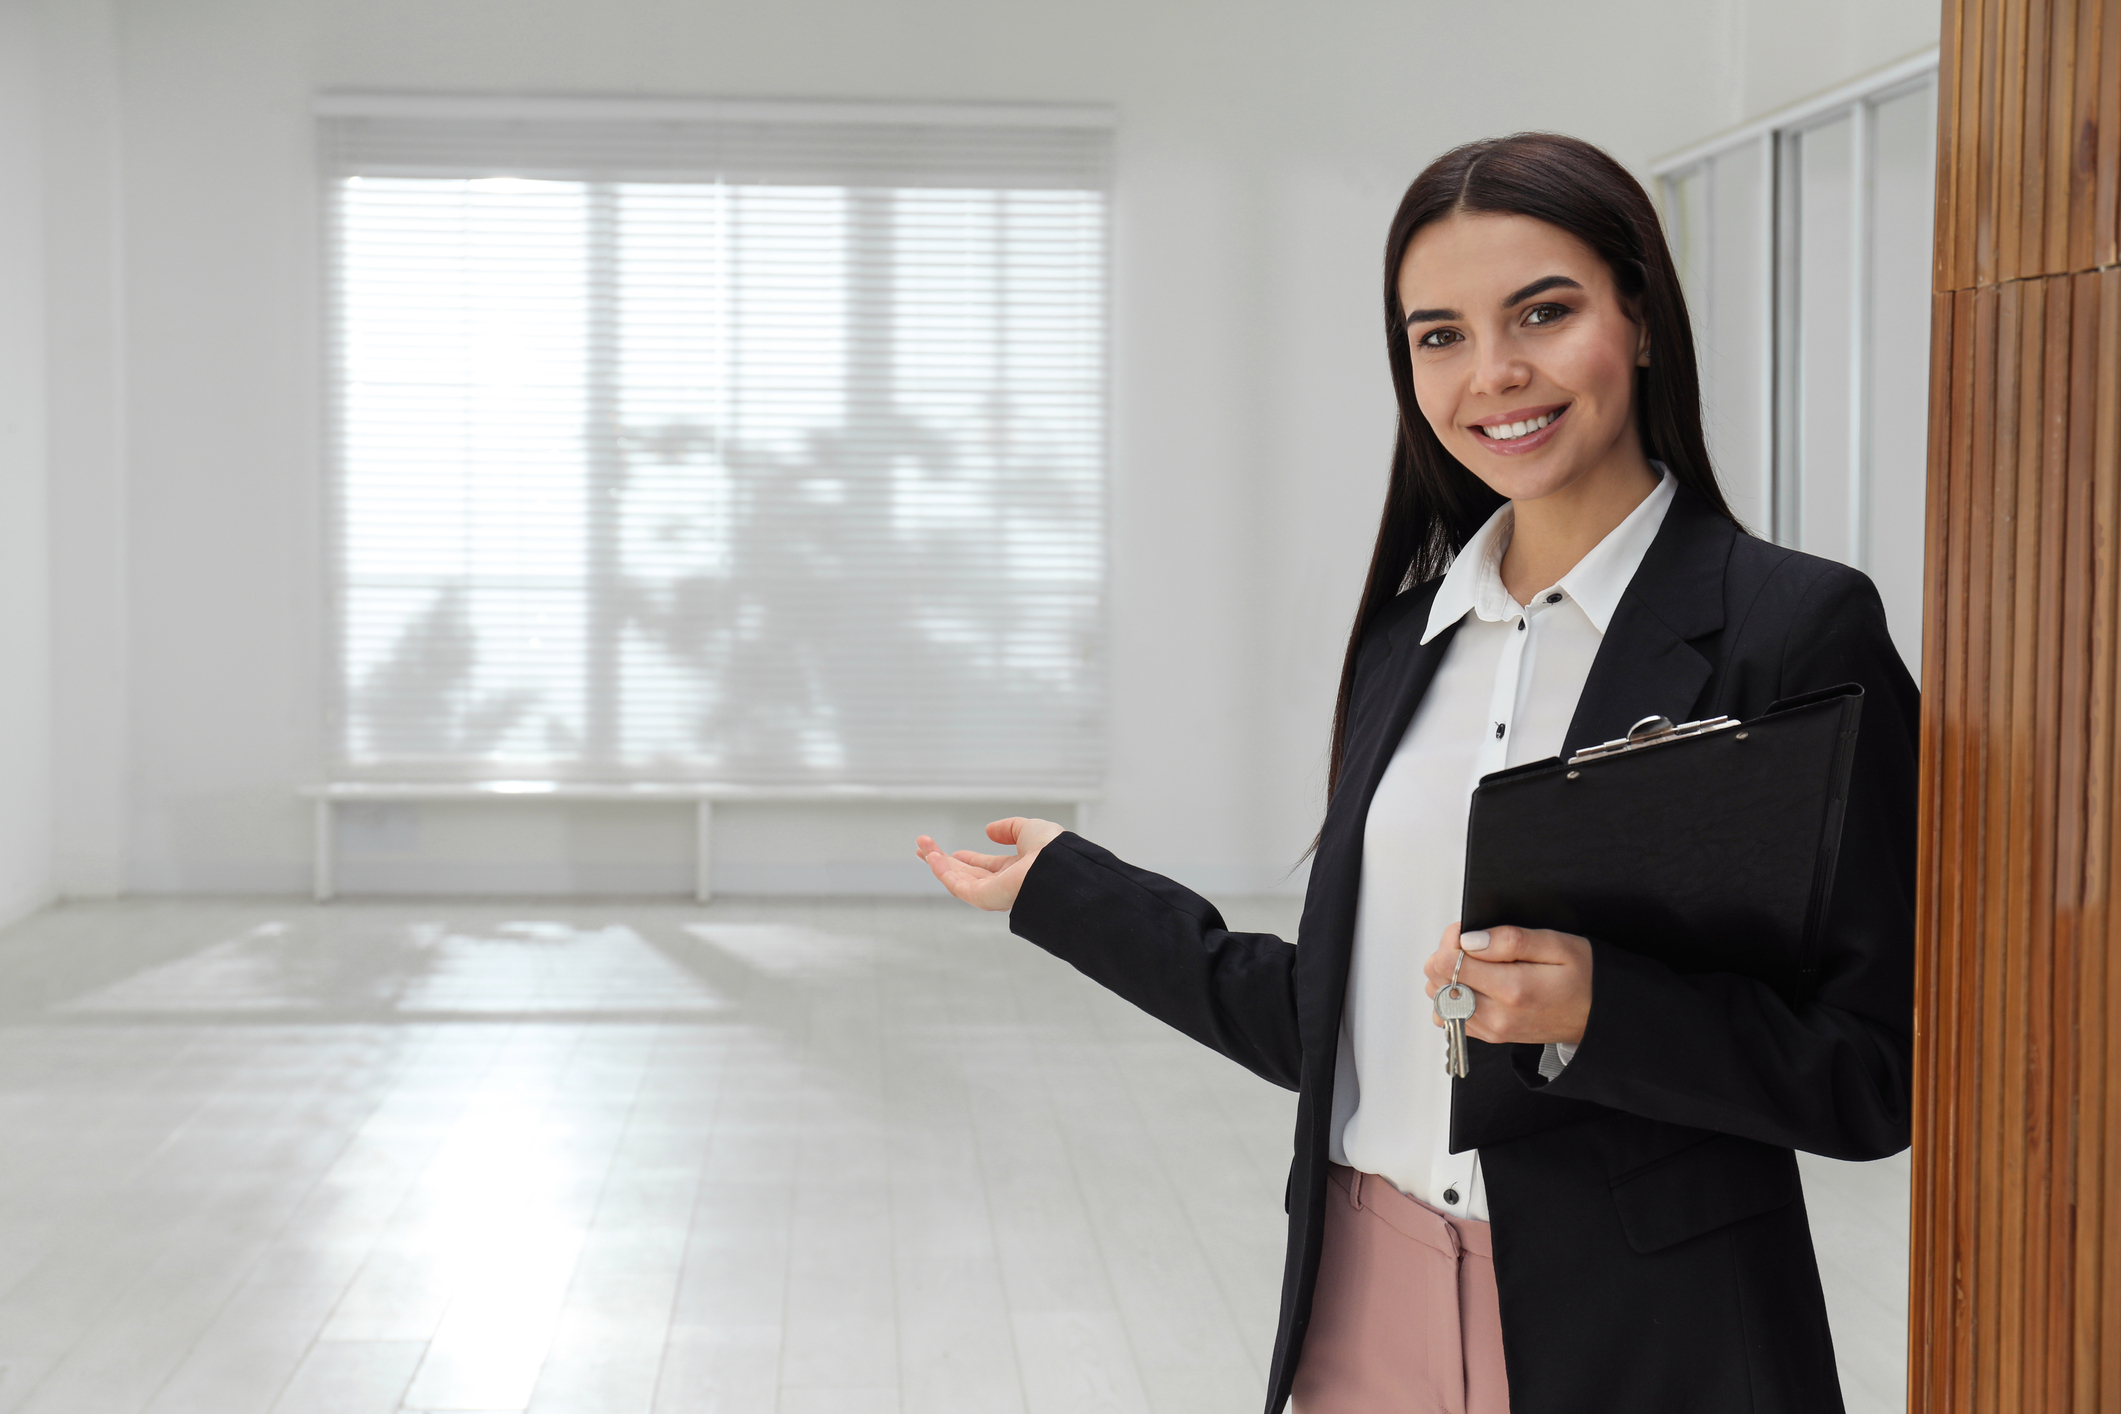 A leasing agent showing an empty room in an apartment